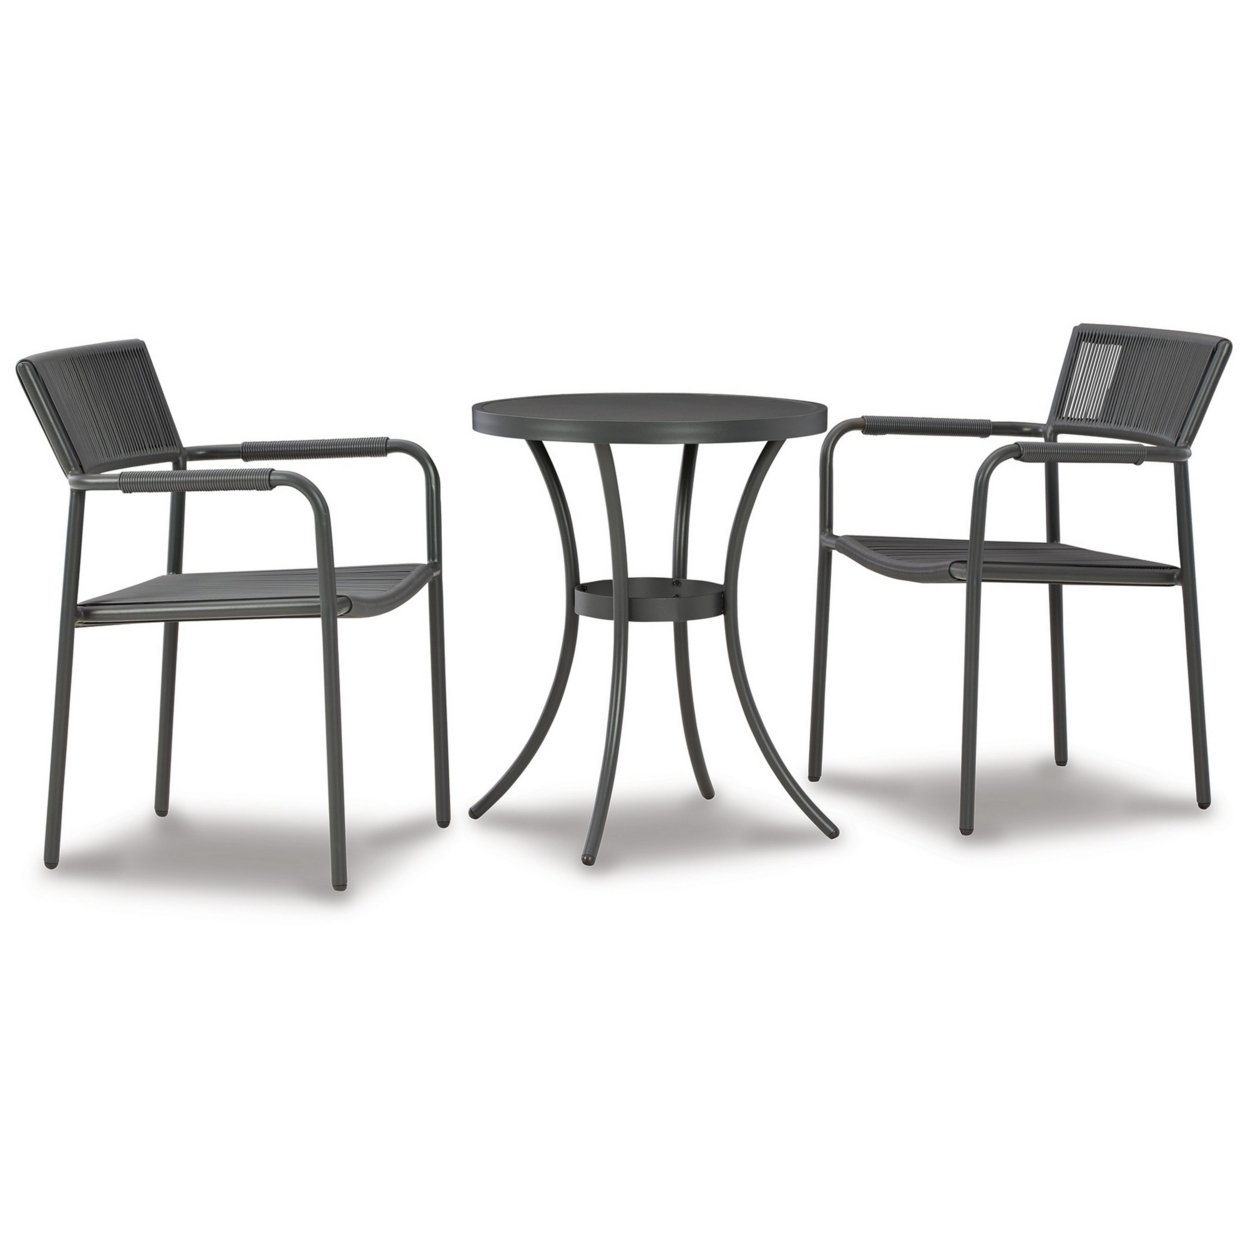 3 Piece Outdoor Table And Chair Set, Gray Steel Frame, Woven Resin Wicker